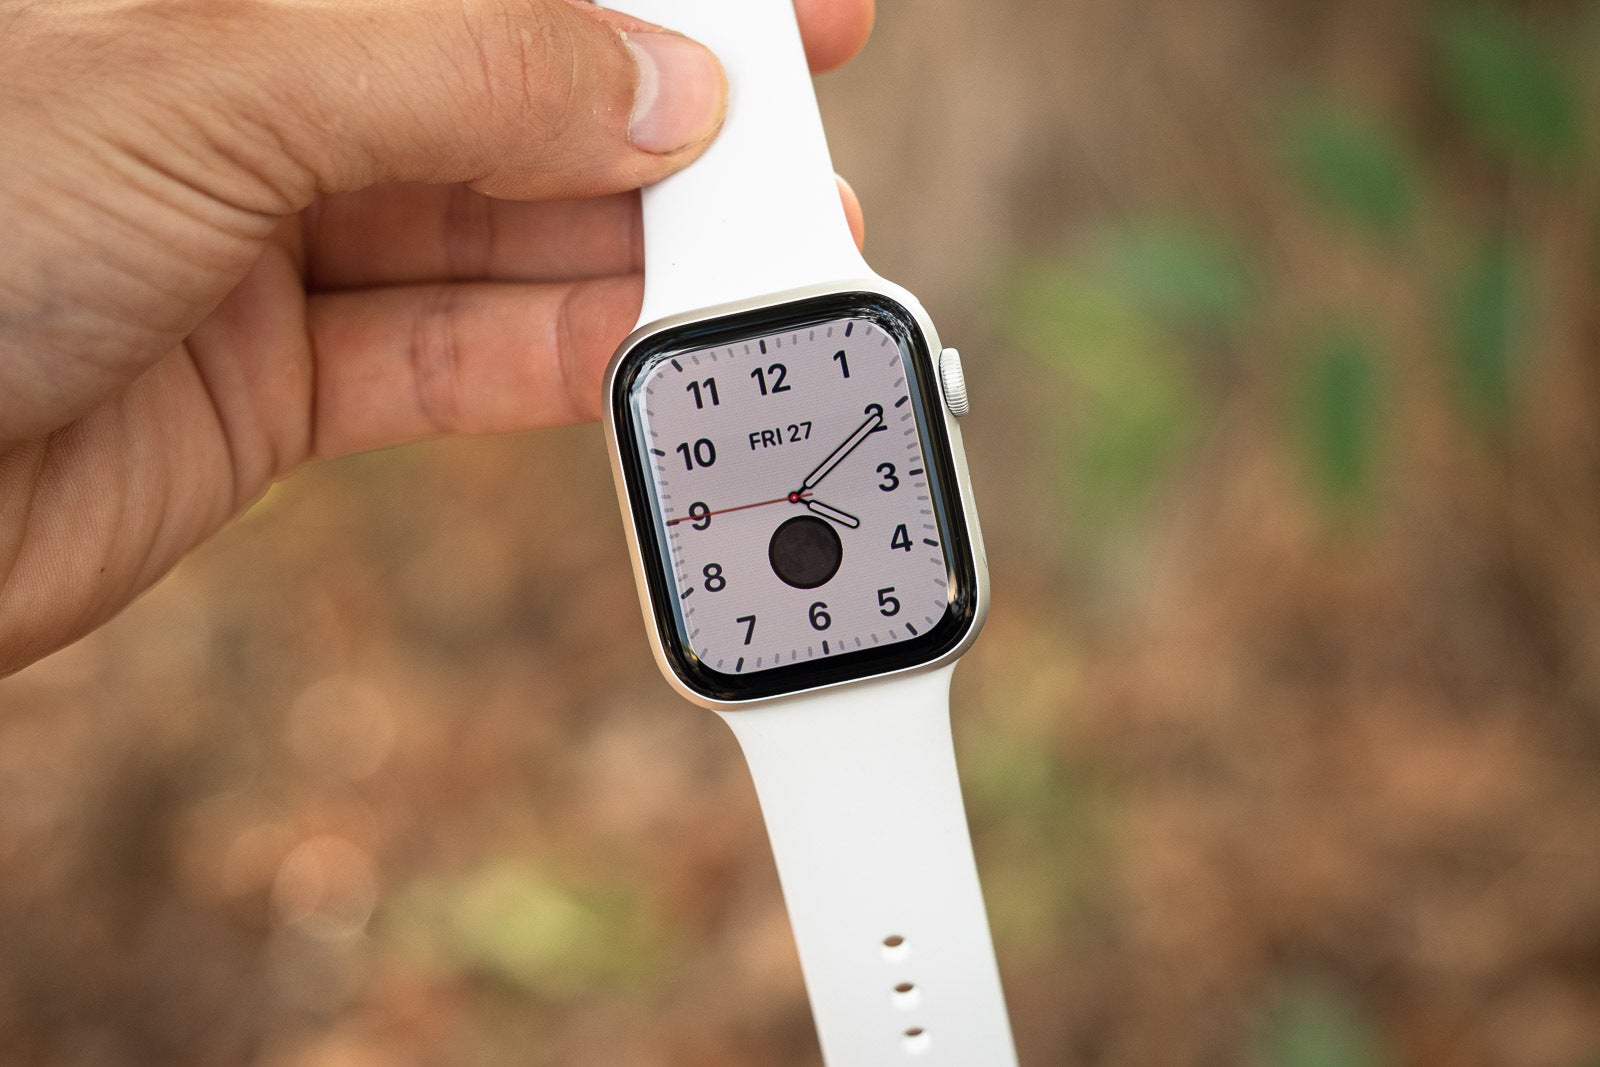 The iPhone and Apple Watch are more popular than ever among US teenagers